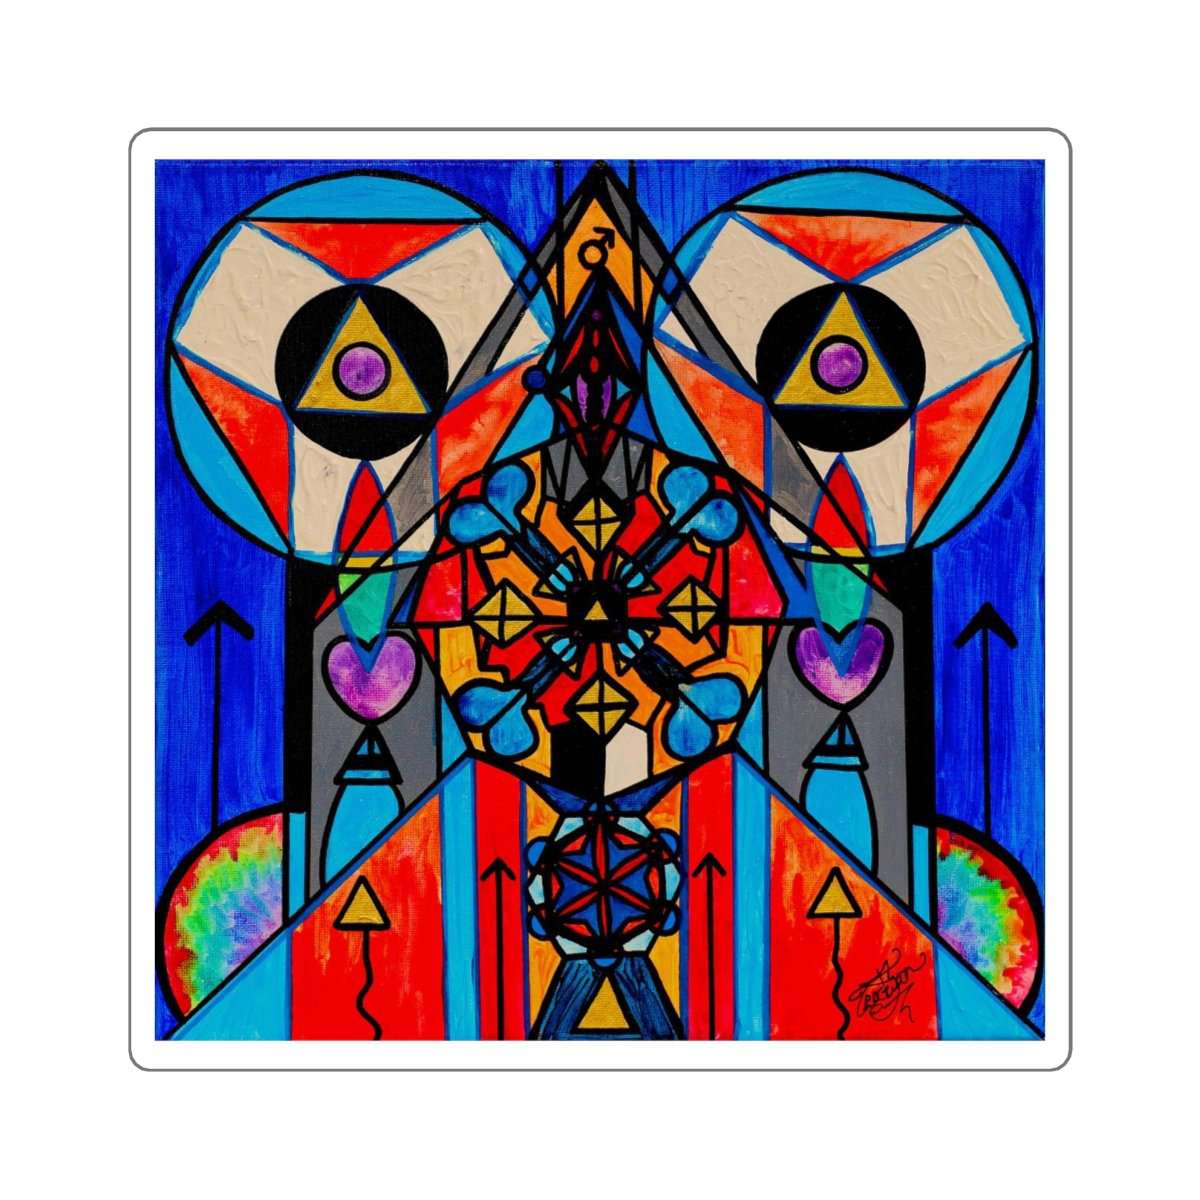 buy-cheap-wholesale-divine-masculine-activation-square-stickers-hot-on-sale_0.jpg